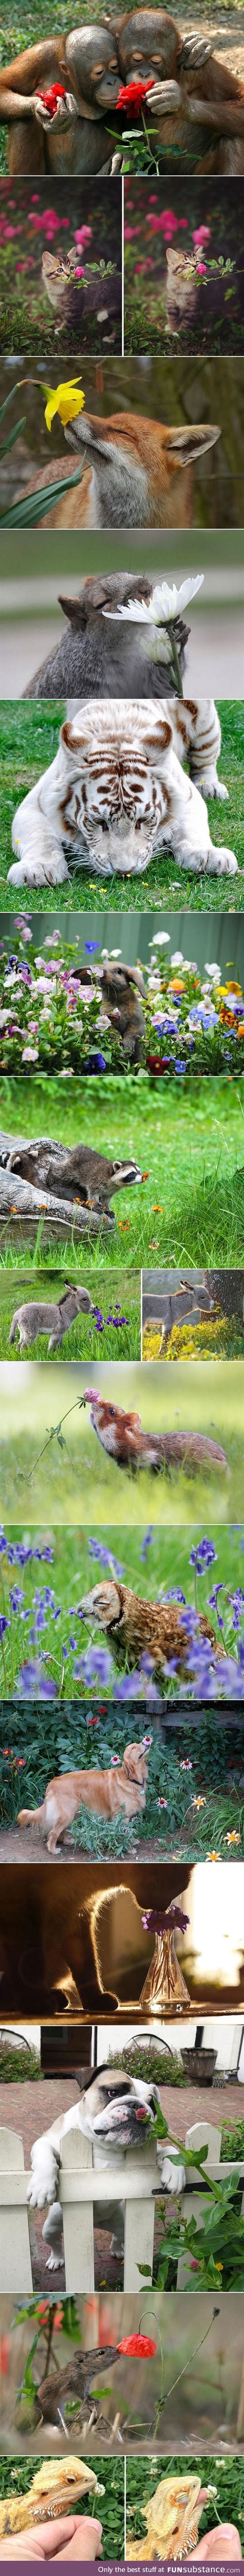 Animals smelling flowers